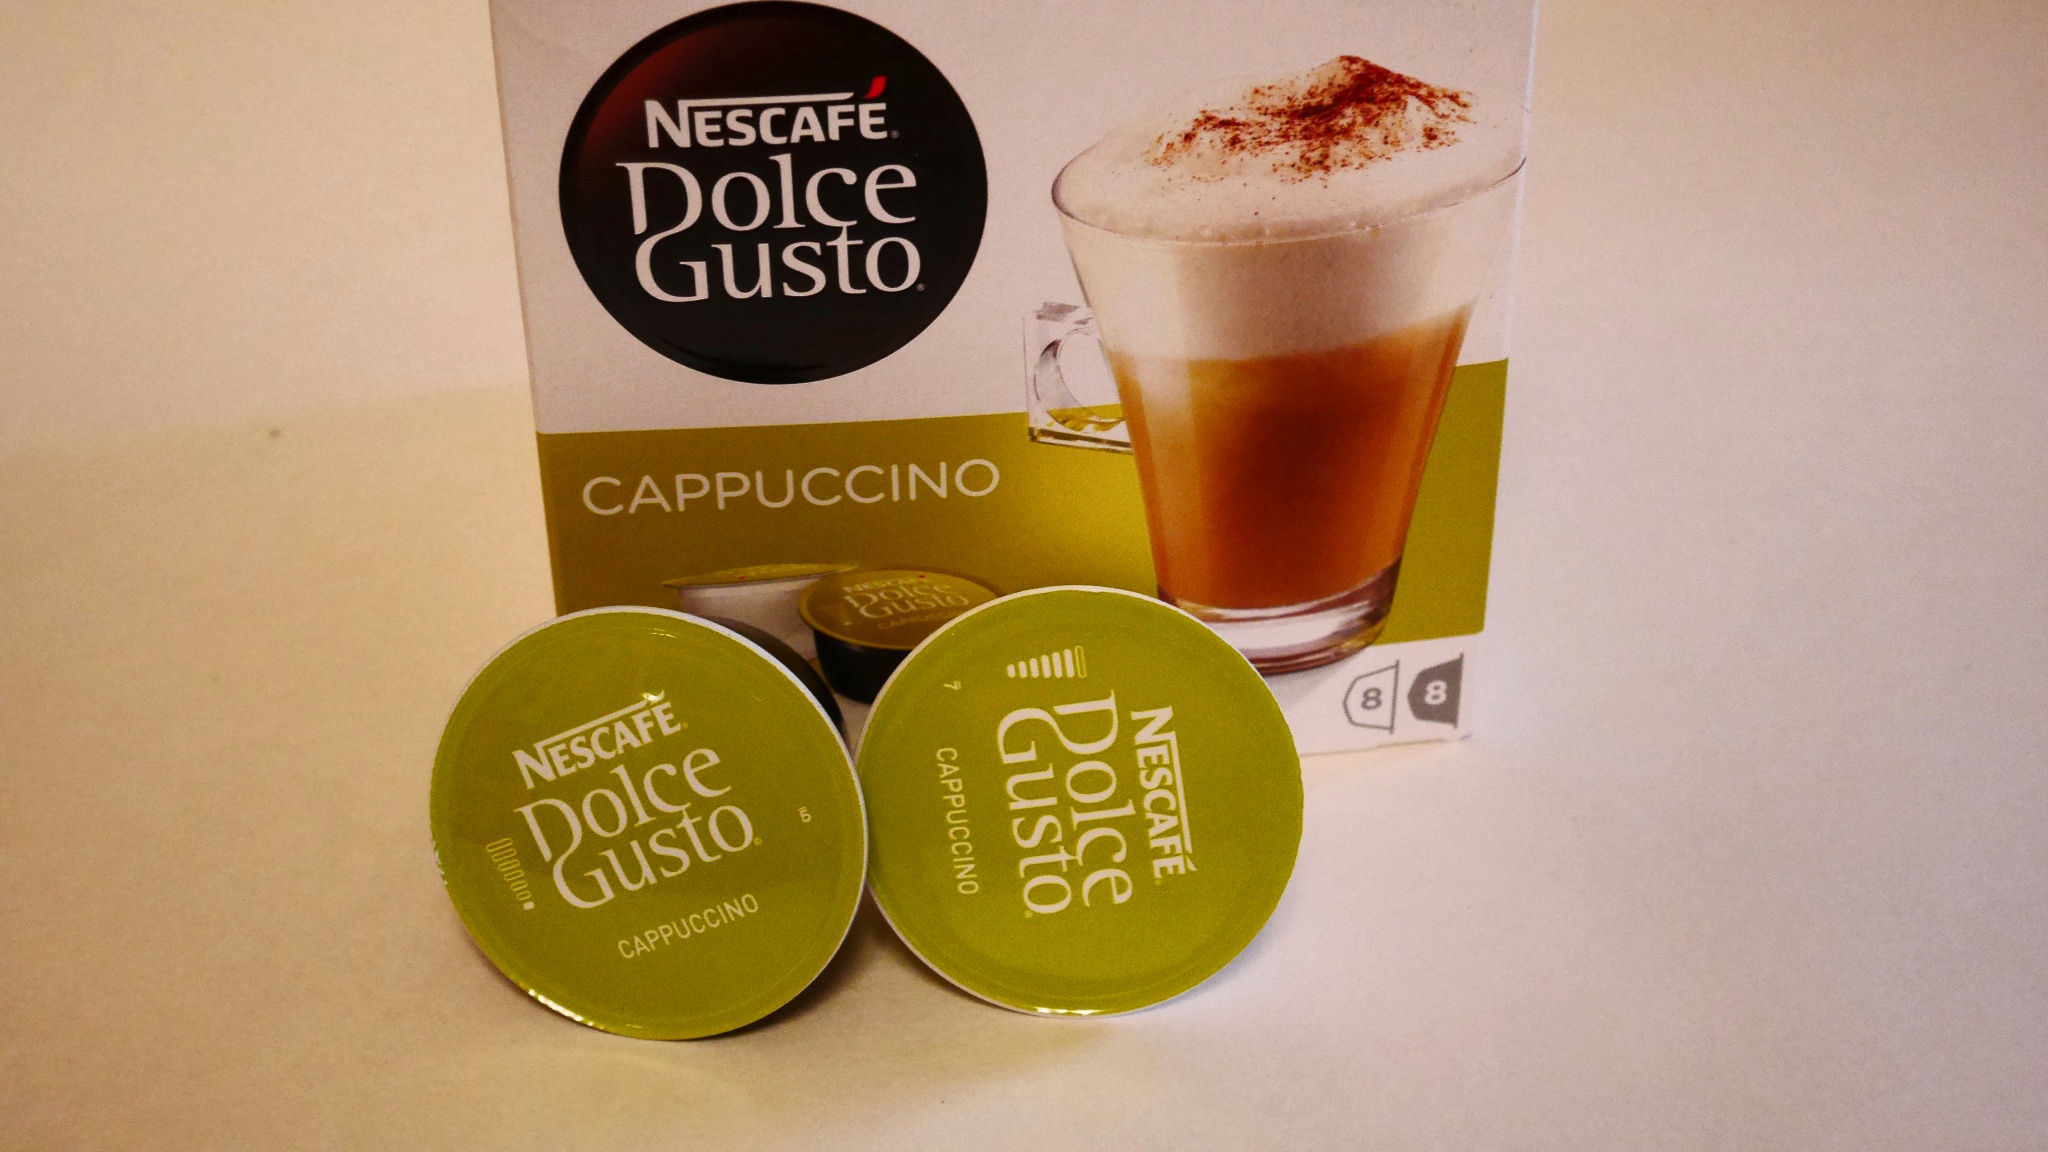 Dolce gusto cappuccino. Капсулы Nescafe Dolce gusto Cappuccino. Nescafe Dolce gusto капсулы. Lebo Coffee Cappuccino капсулы Dolce gusto. Кофе в капсулах Nescafe Dolce gusto 87377 капучино.